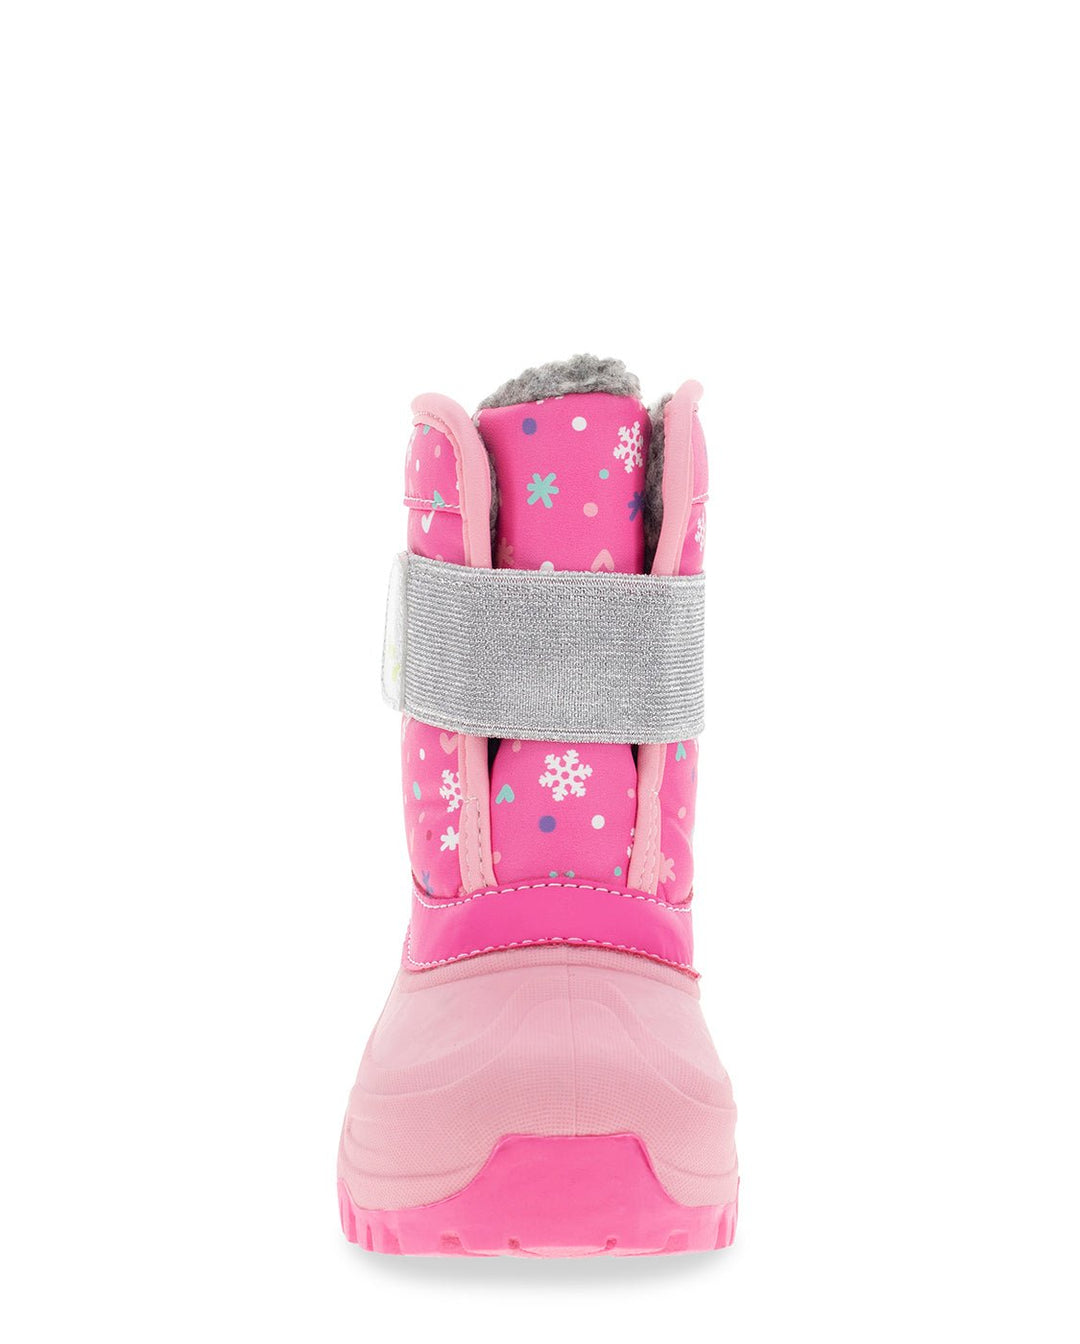 Kids Baker Cold Weather - Pink - Western Chief